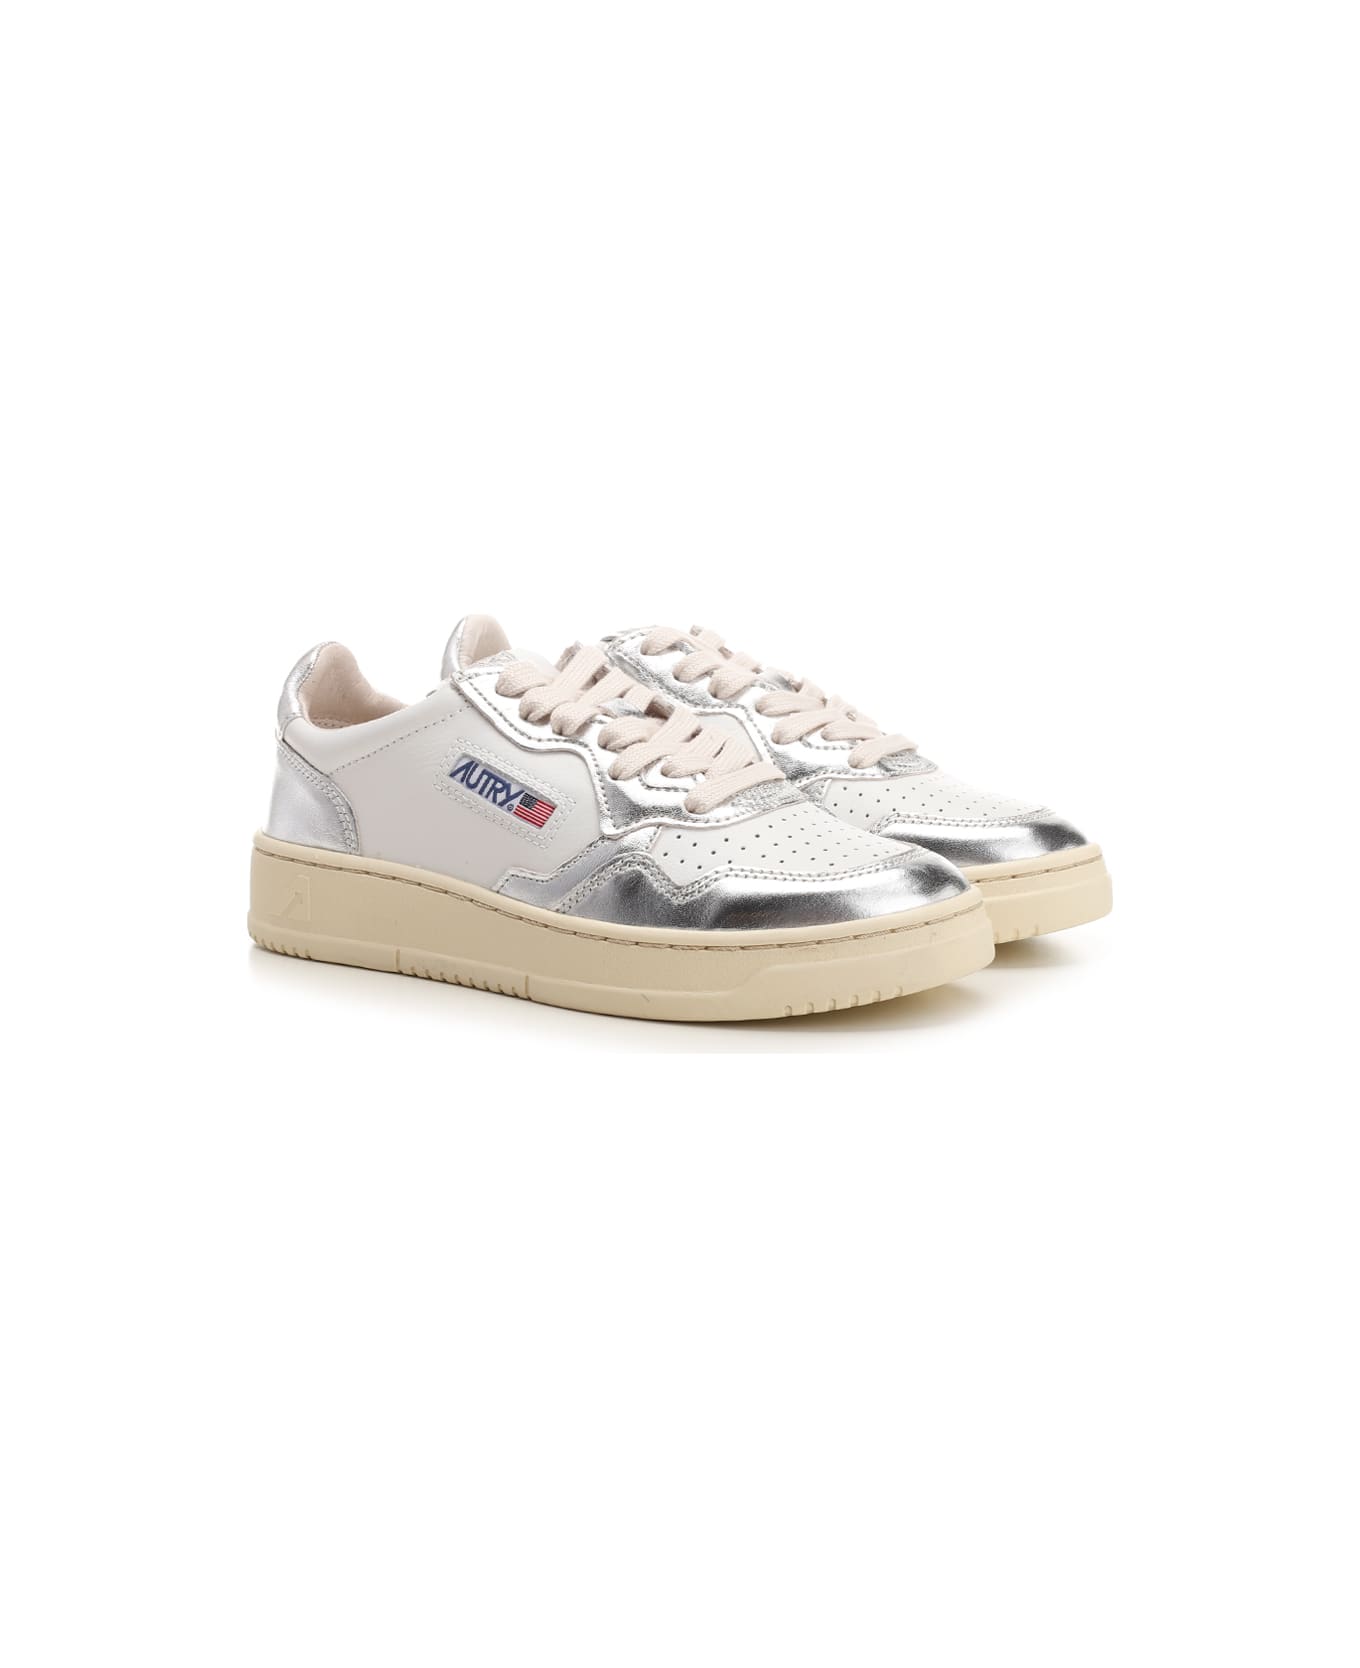 Autry 'medalist' Sneakers With Silver Inserts - Wht/silver